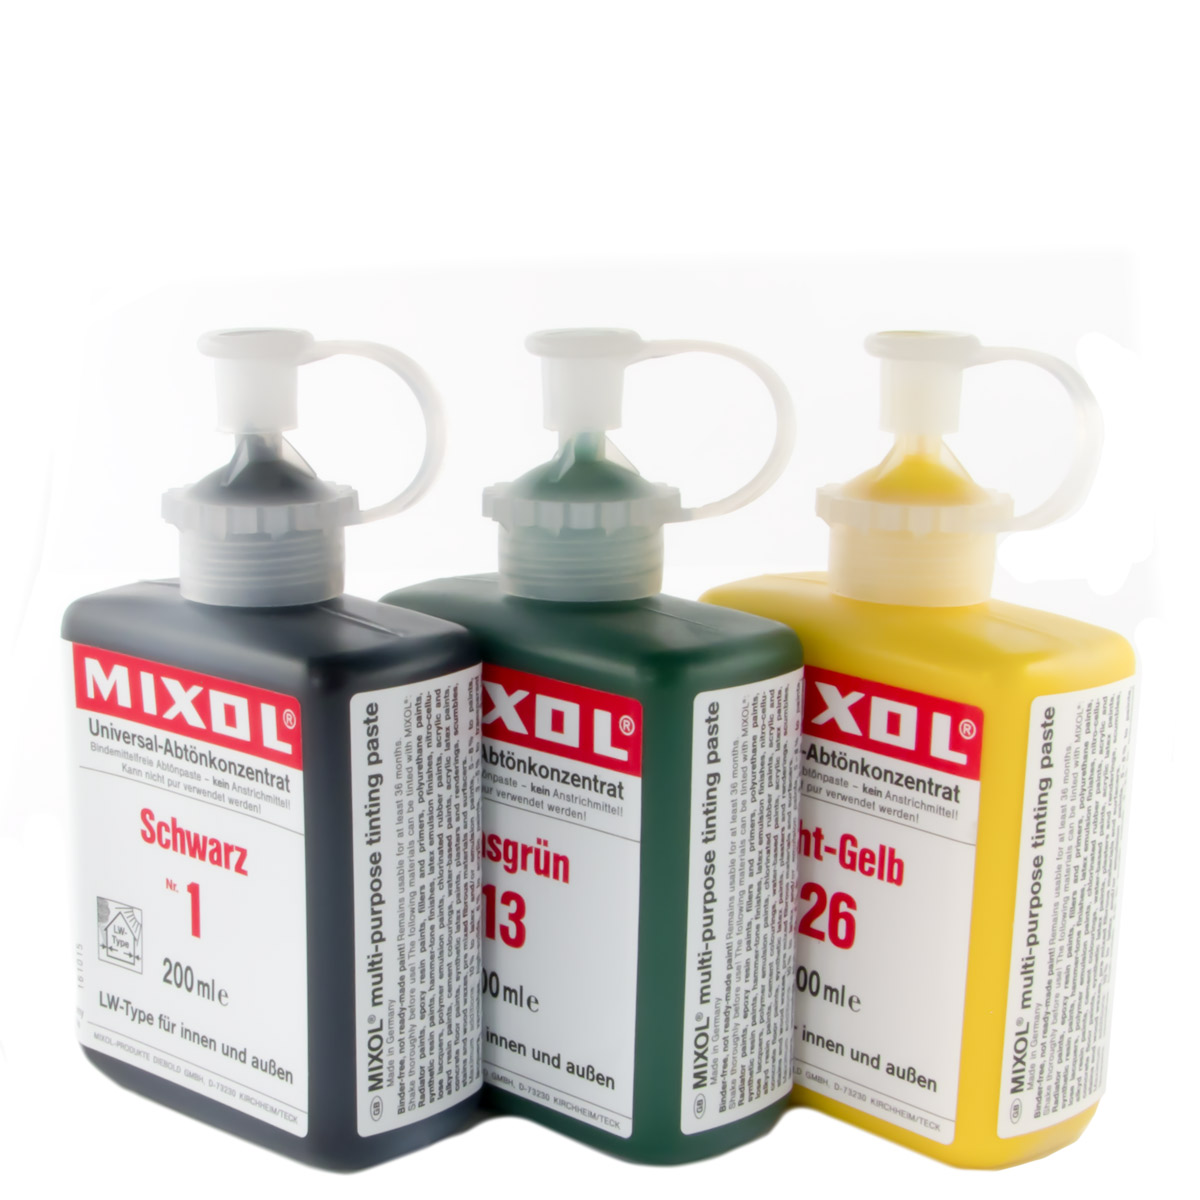 Mixol Universal Stainers